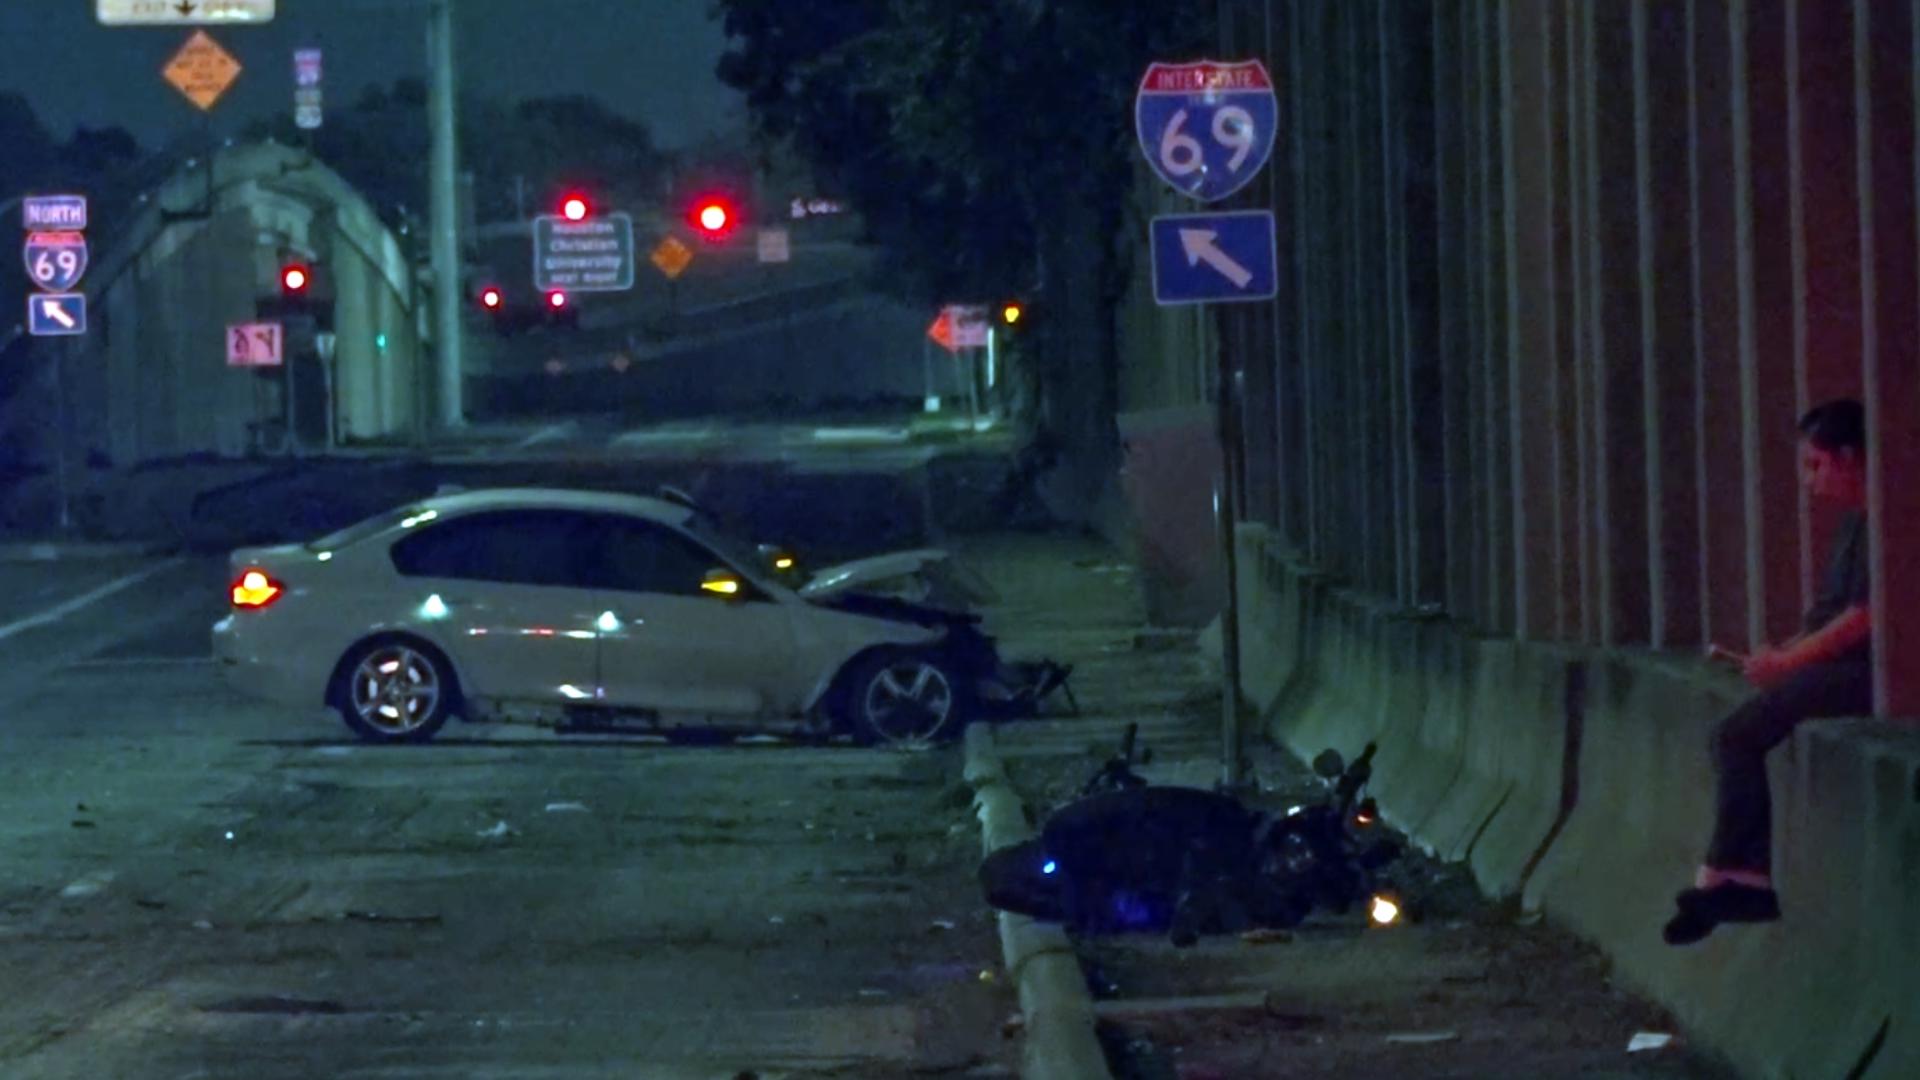 Investigators said a white BMW traveling at a high rate of speed crashed into the motorcycle and the driver of the car took off.